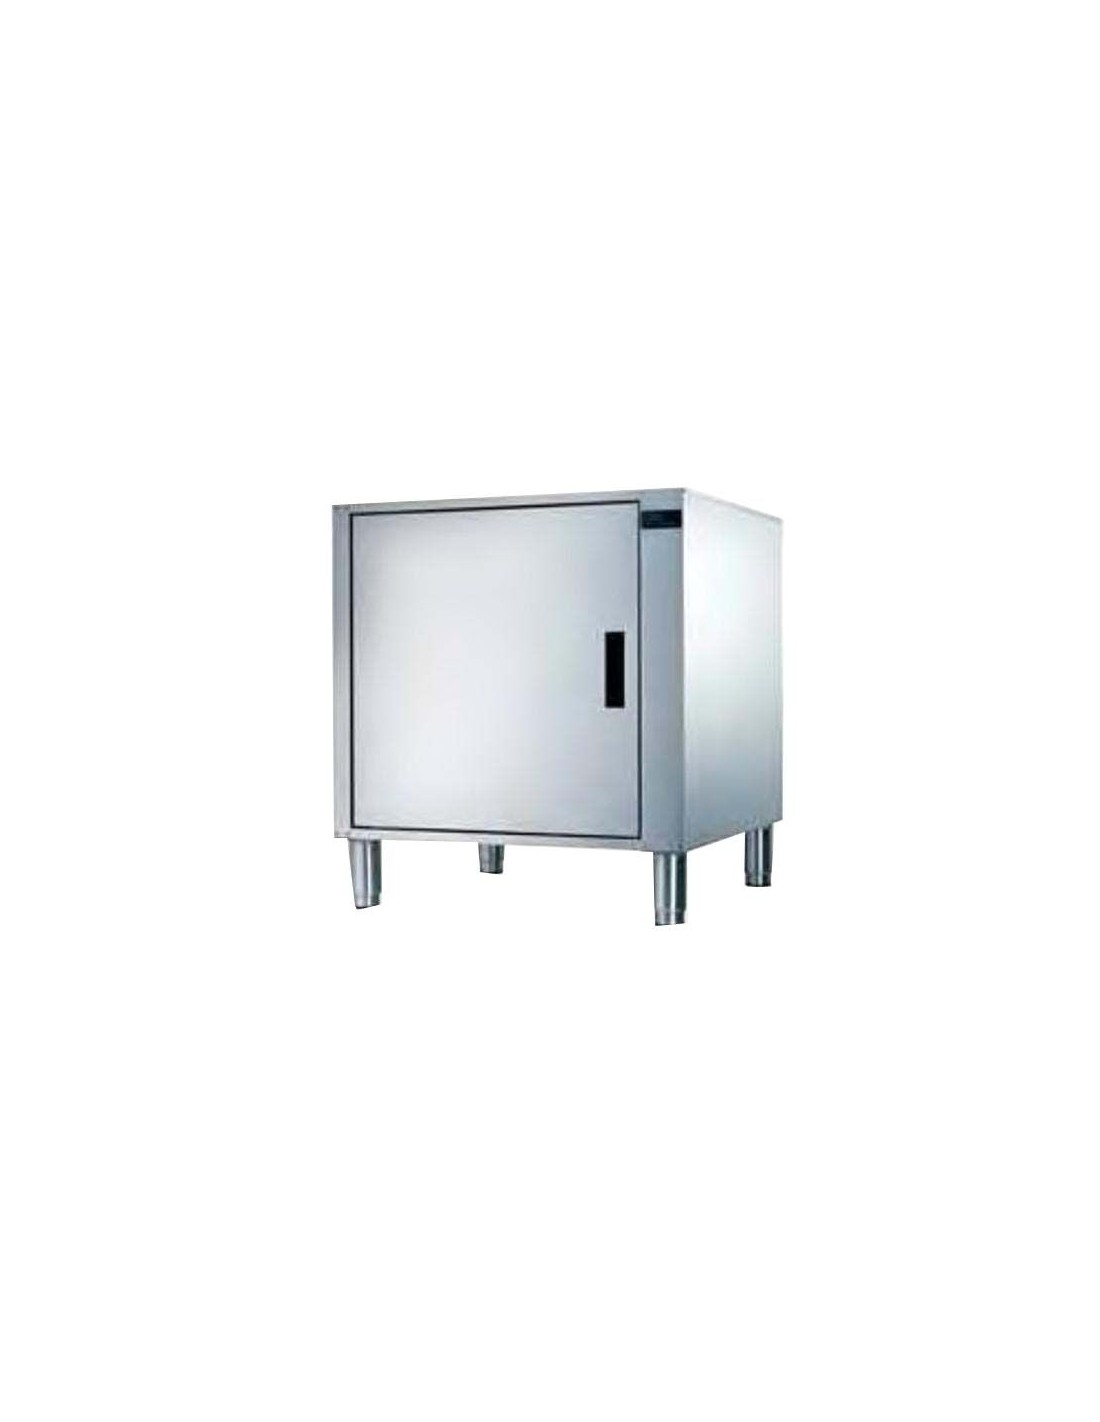 Hot cupboard - Trays capacity n. 16 GN 1/1 - Power supply 230 V 50/60 Hz single-phase - Power kW 1.65 - Space between trays 6.5